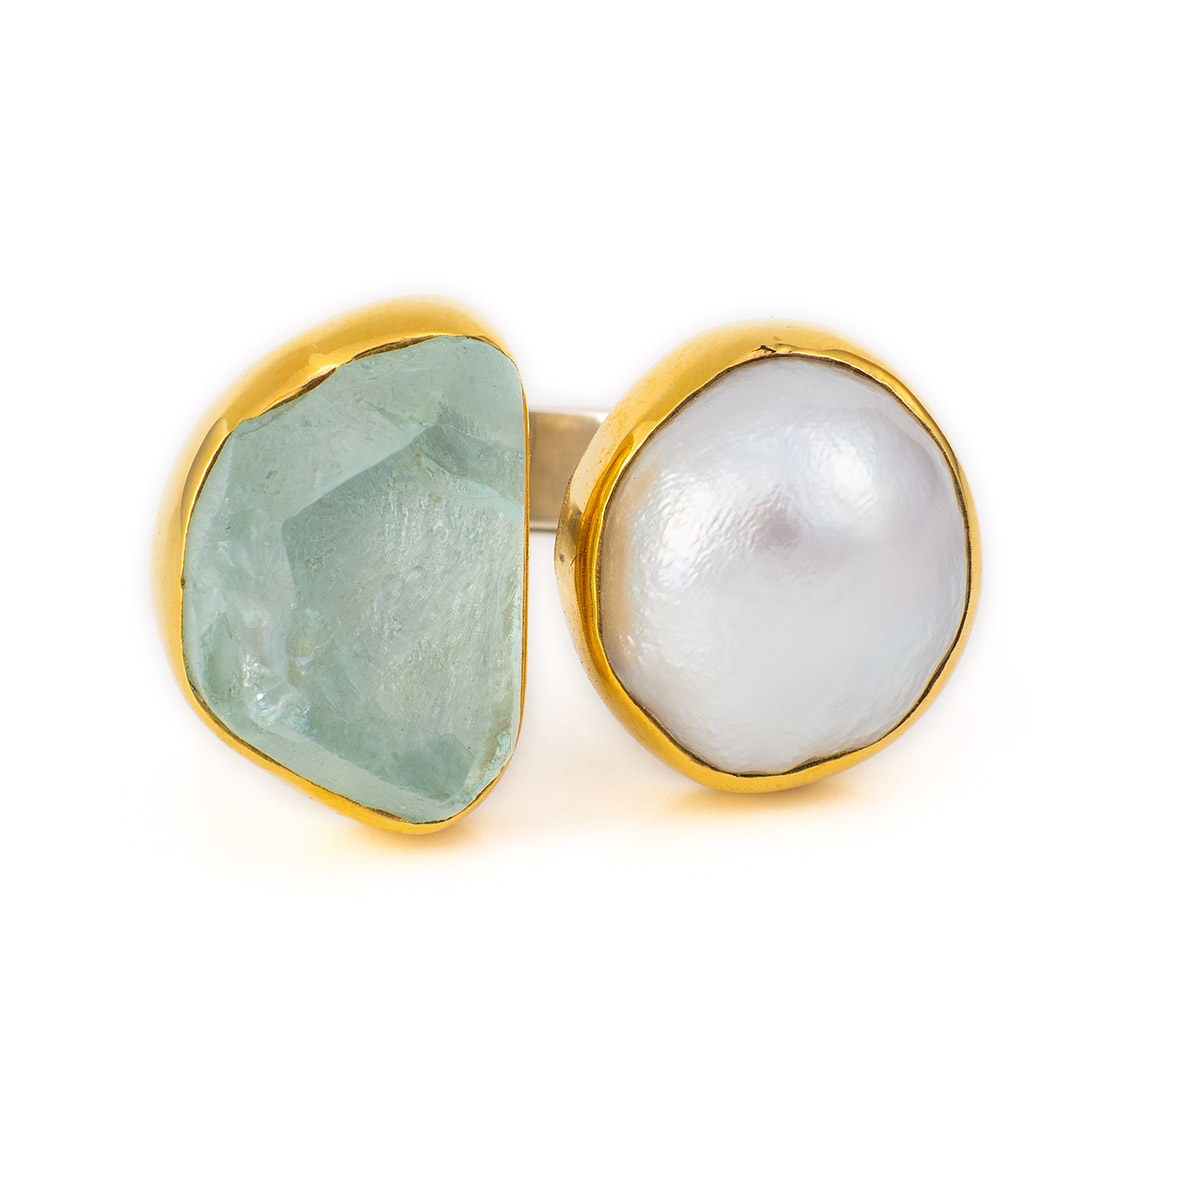 Aquamarine Ring with Pearl - 18K Gold and Sterling Silver